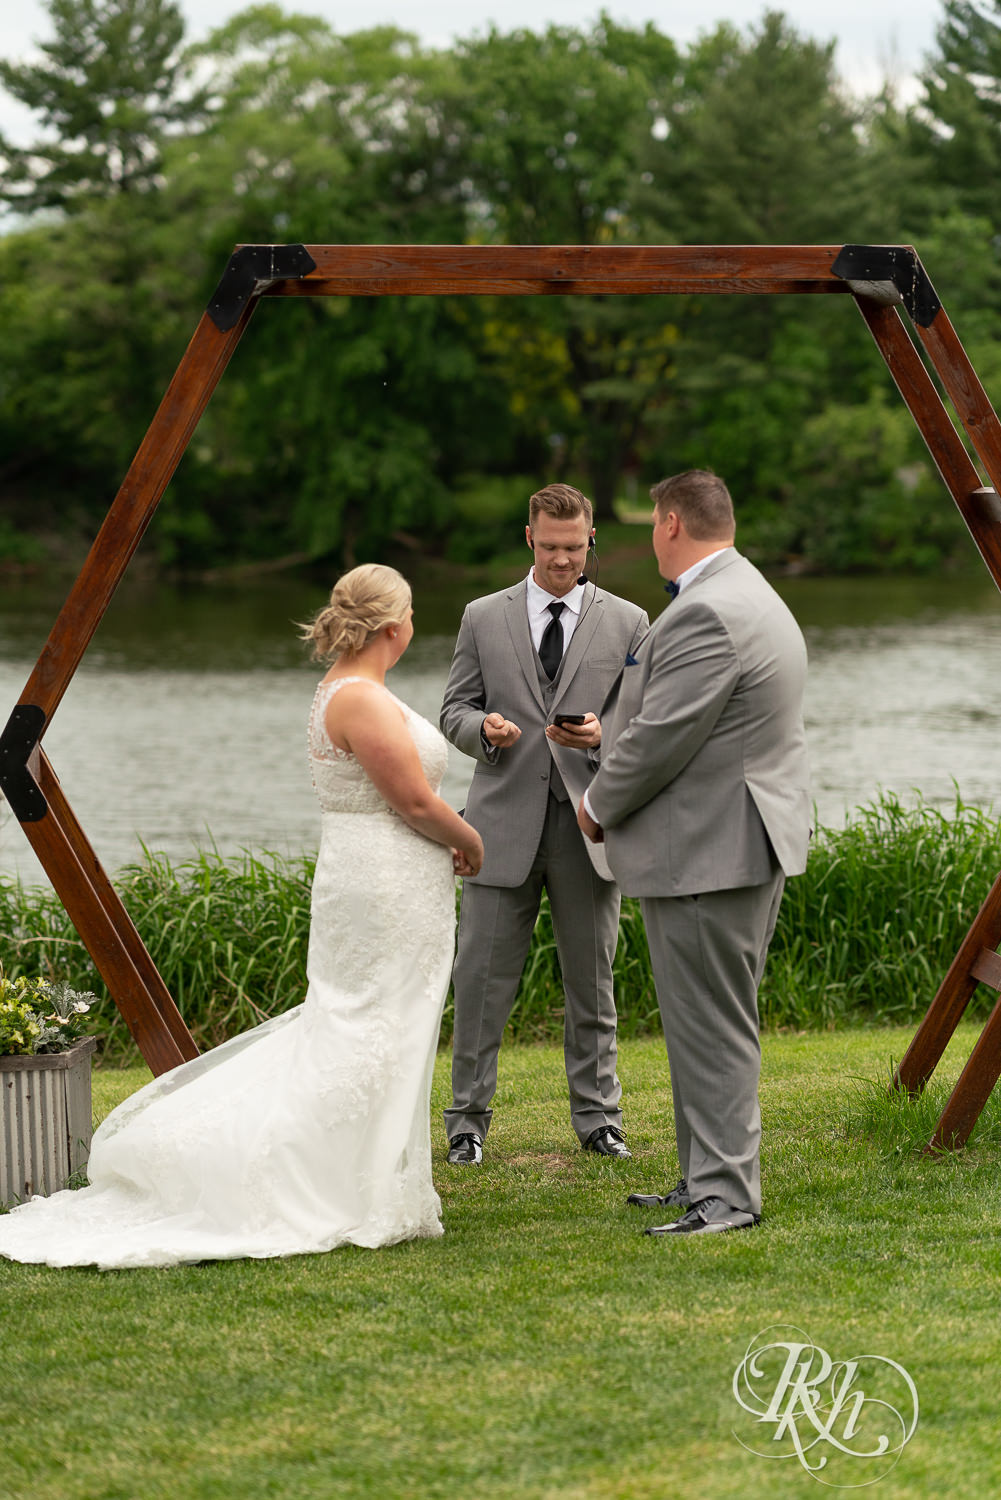 Bride and groom at lakefront wedding ceremony at Barn at Mirror Lake in Mondovi, Wisconsin.